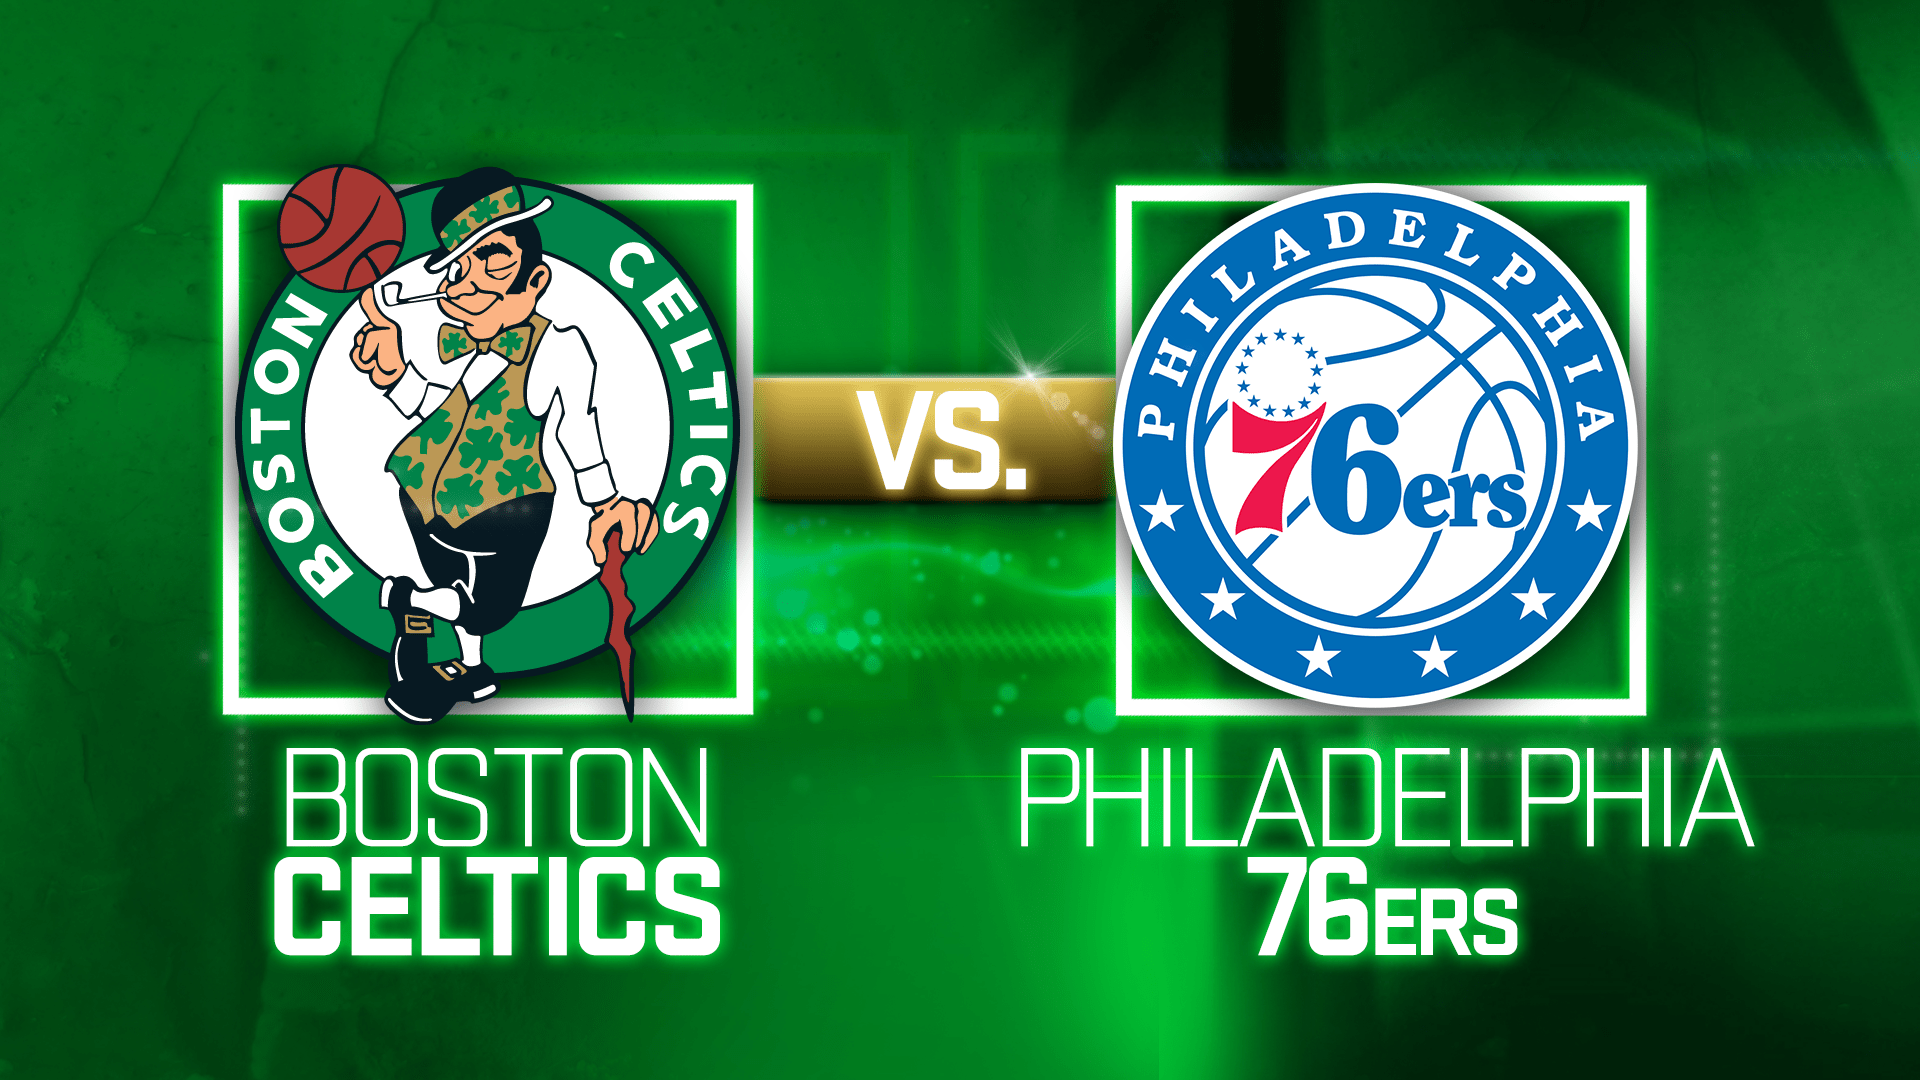 Jaylen Brown scores 31, Celtics pull away in fourth to beat 76ers 117